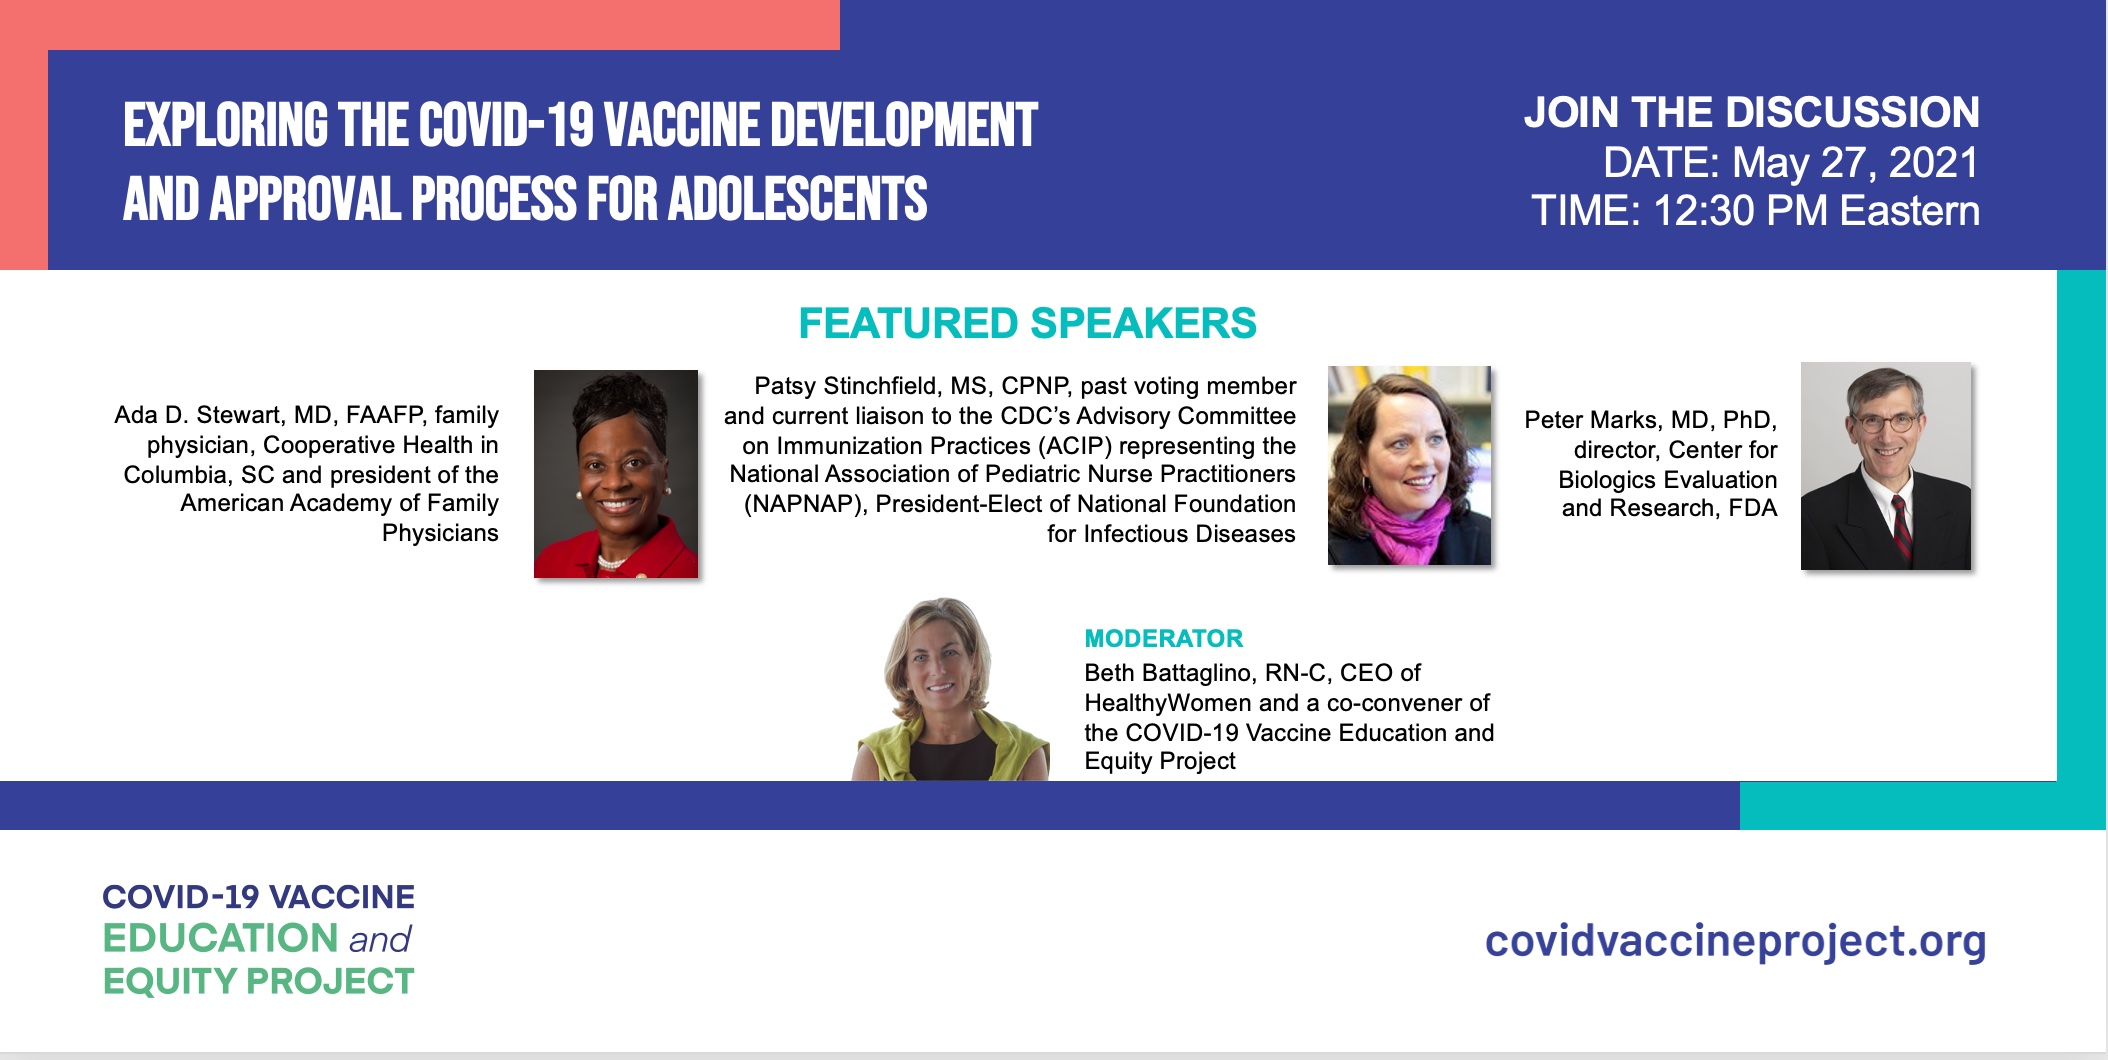 Webinar Recording: “Exploring the COVID-19 Vaccine Development and Approval Process for Adolescents”